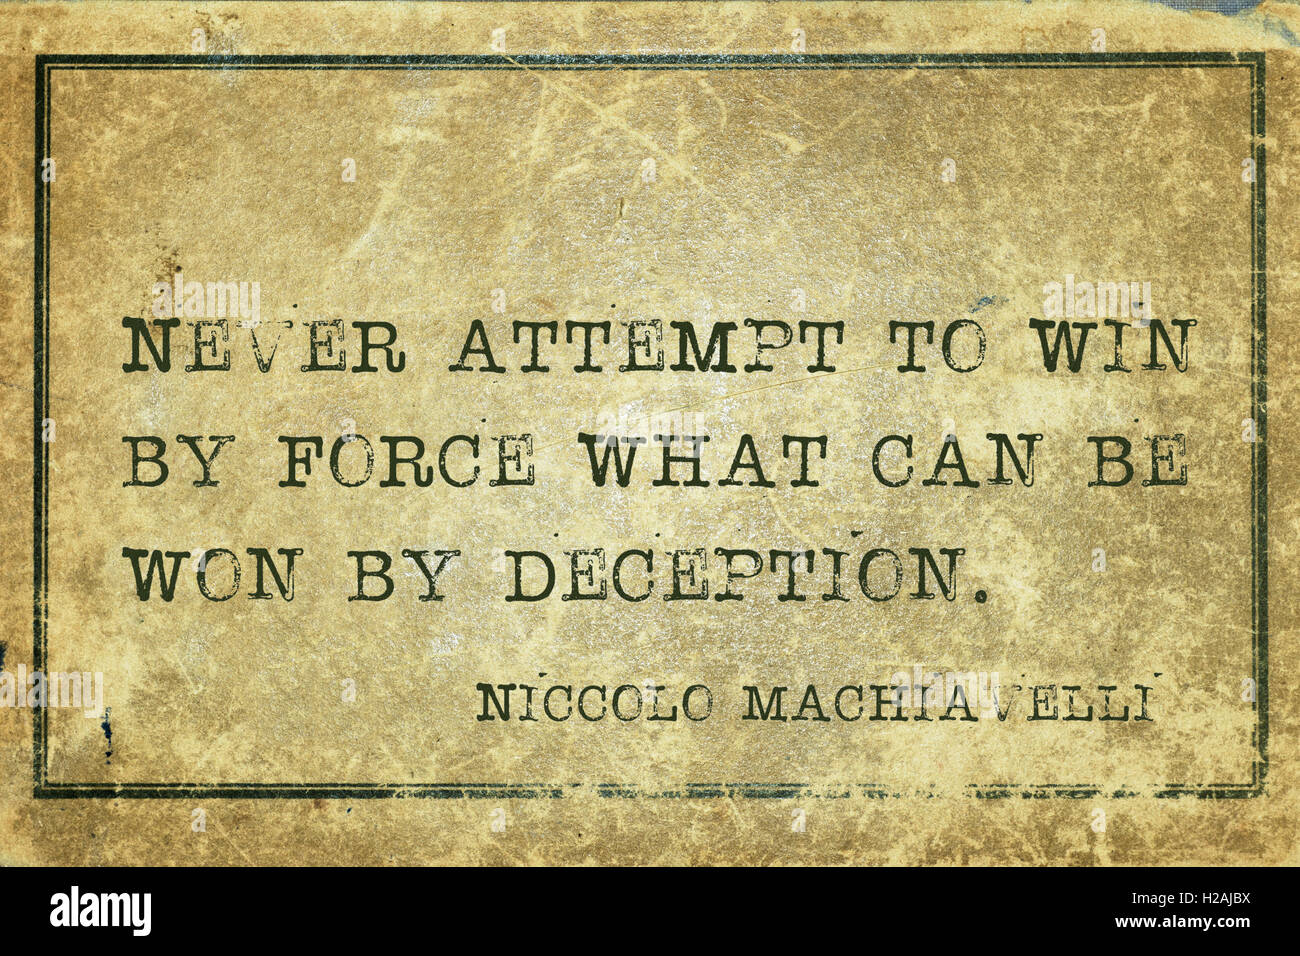 Never attempt to win by force what can be won by deception - ancient Italian philosopher Niccolo Machiavelli quote printed on gr Stock Photo